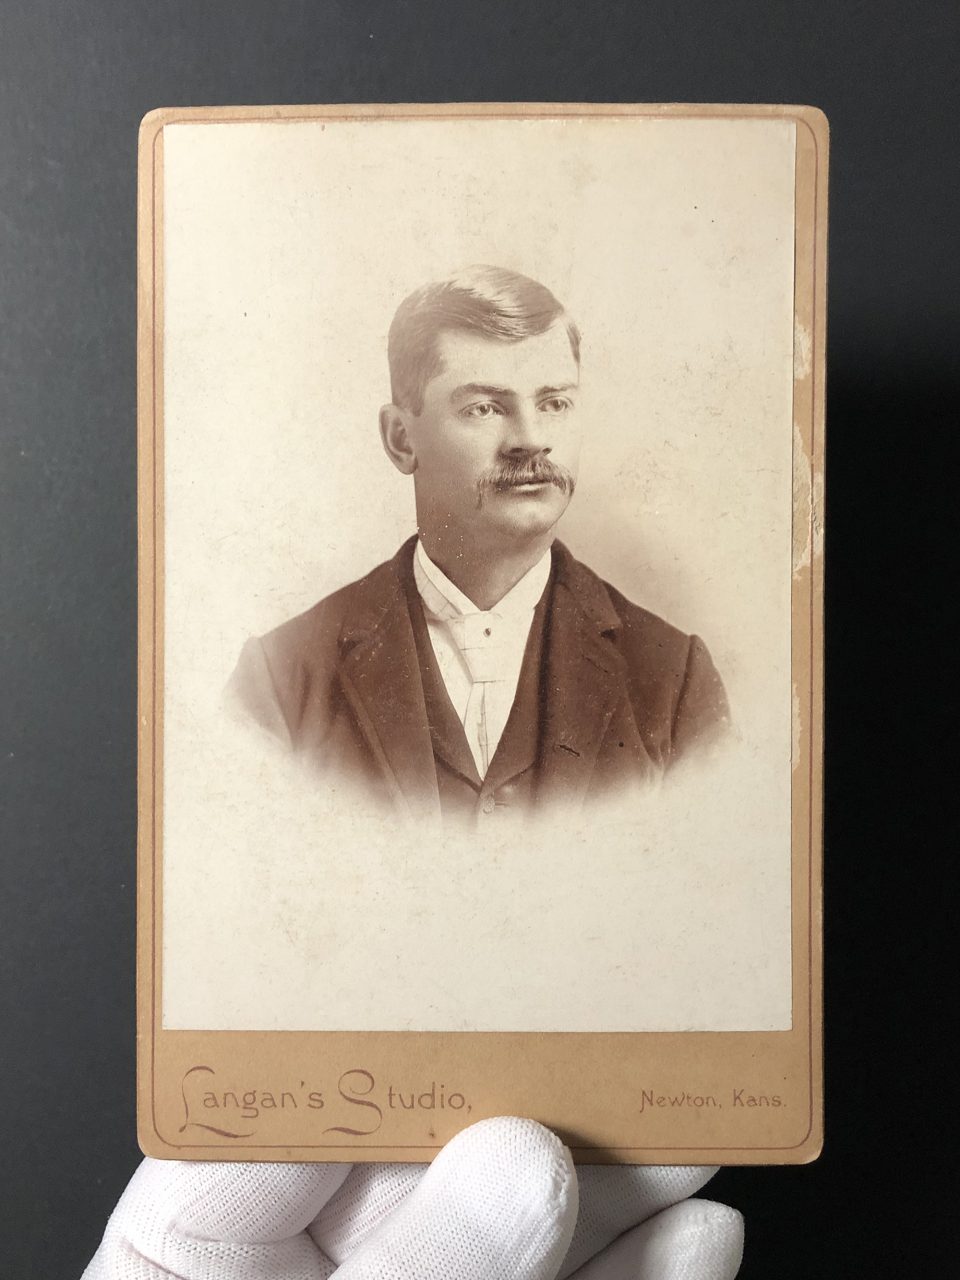 Portrait of a young man with a haircut and a handlebar mustache that were trendy for the time period -- the late 1880s (?)